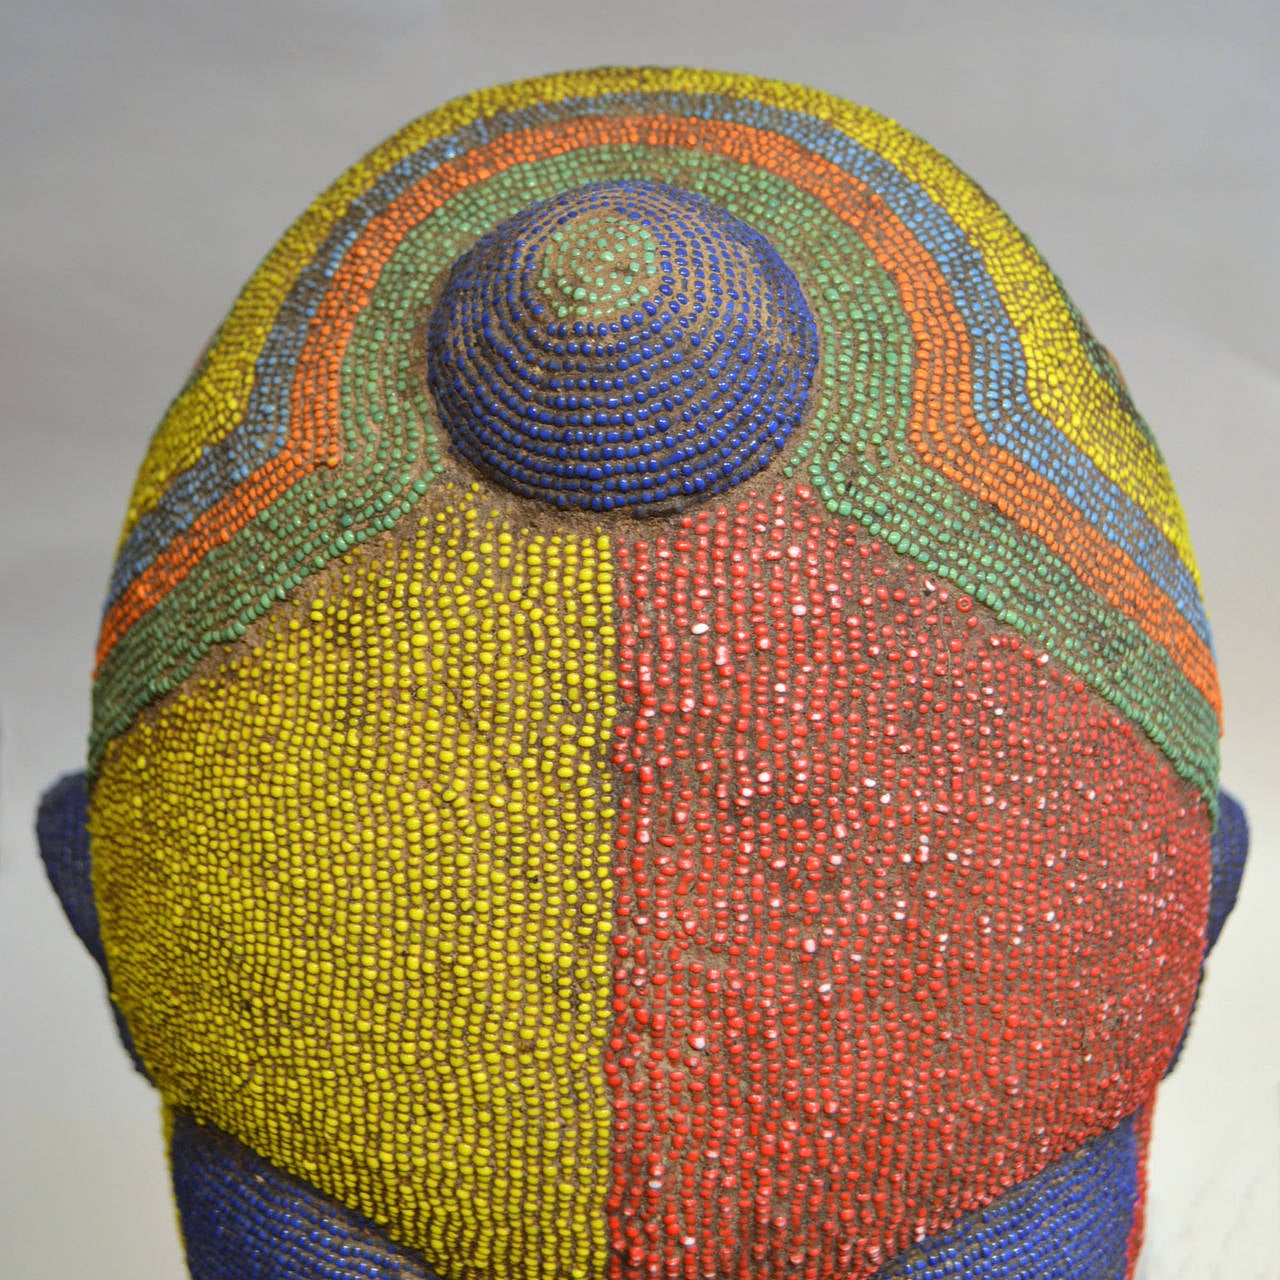 Terracotta 1960s Large Female Beaded Head Sculpture in Primary Colors